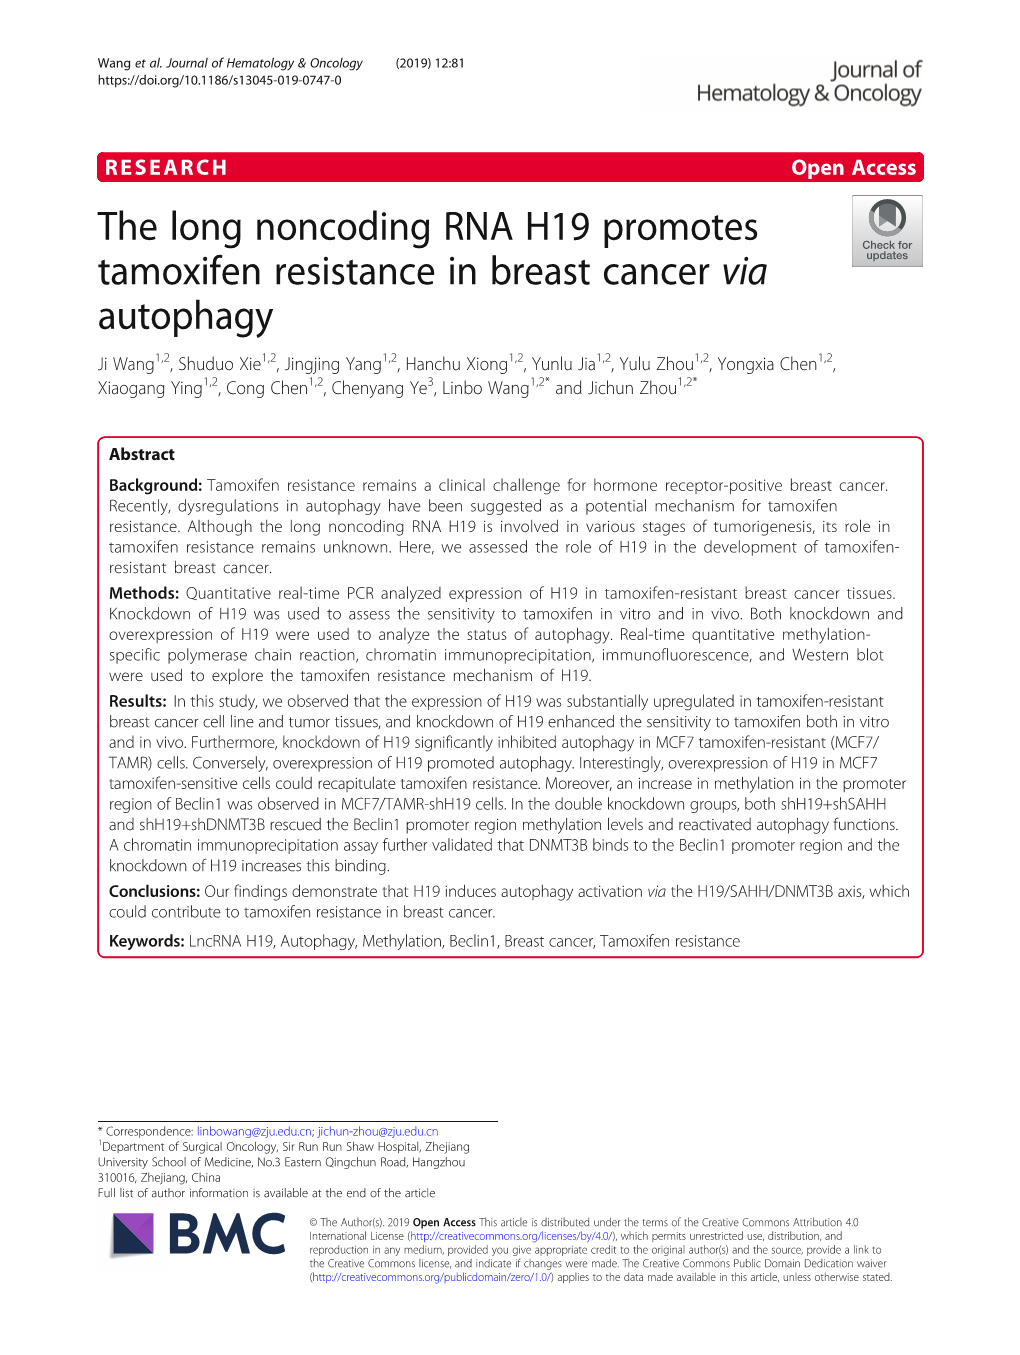 The Long Noncoding RNA H19 Promotes Tamoxifen Resistance In